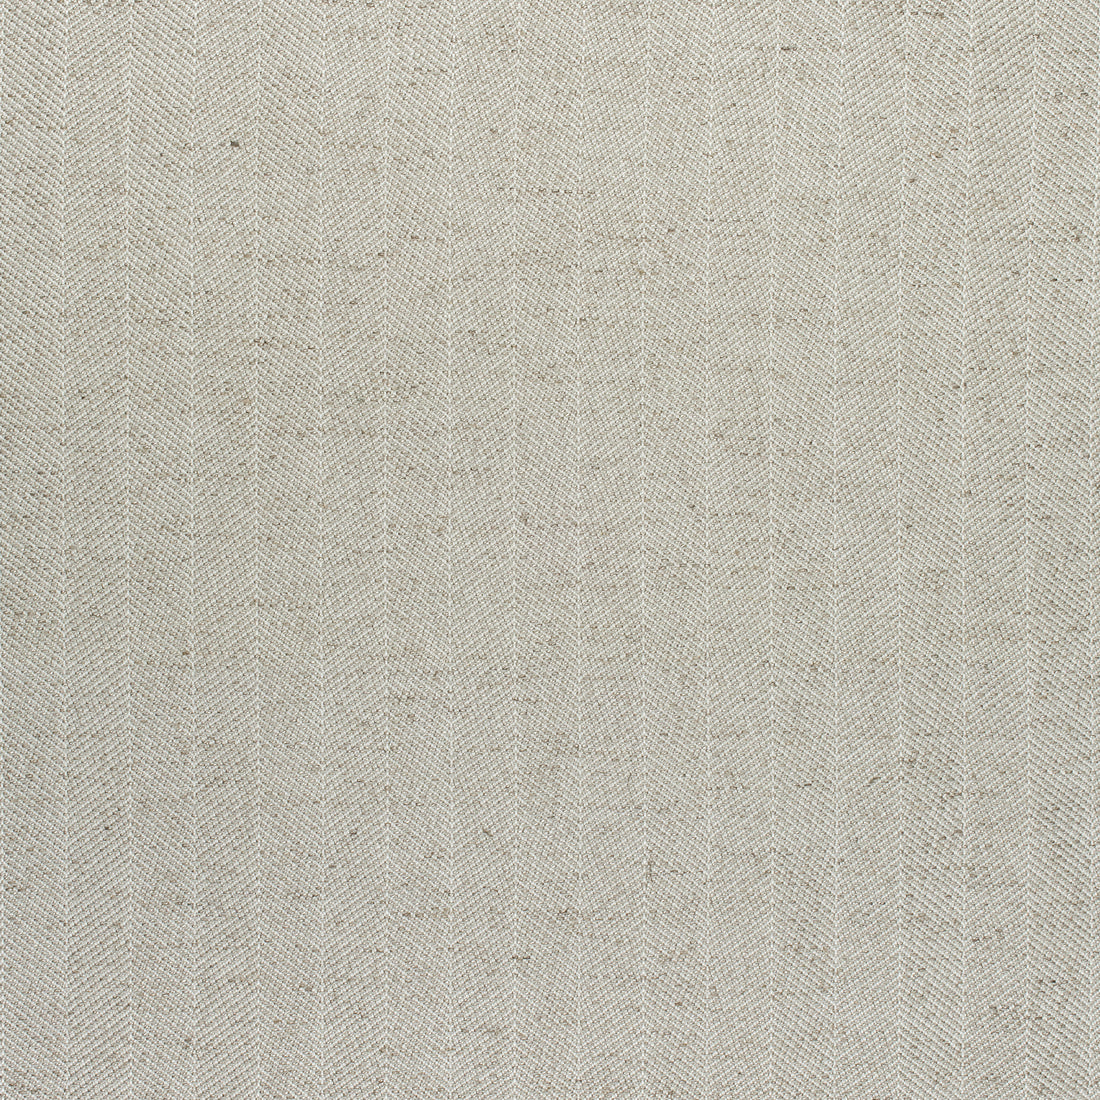 Hamilton Herringbone fabric in sterling grey color - pattern number W80680 - by Thibaut in the Pinnacle collection